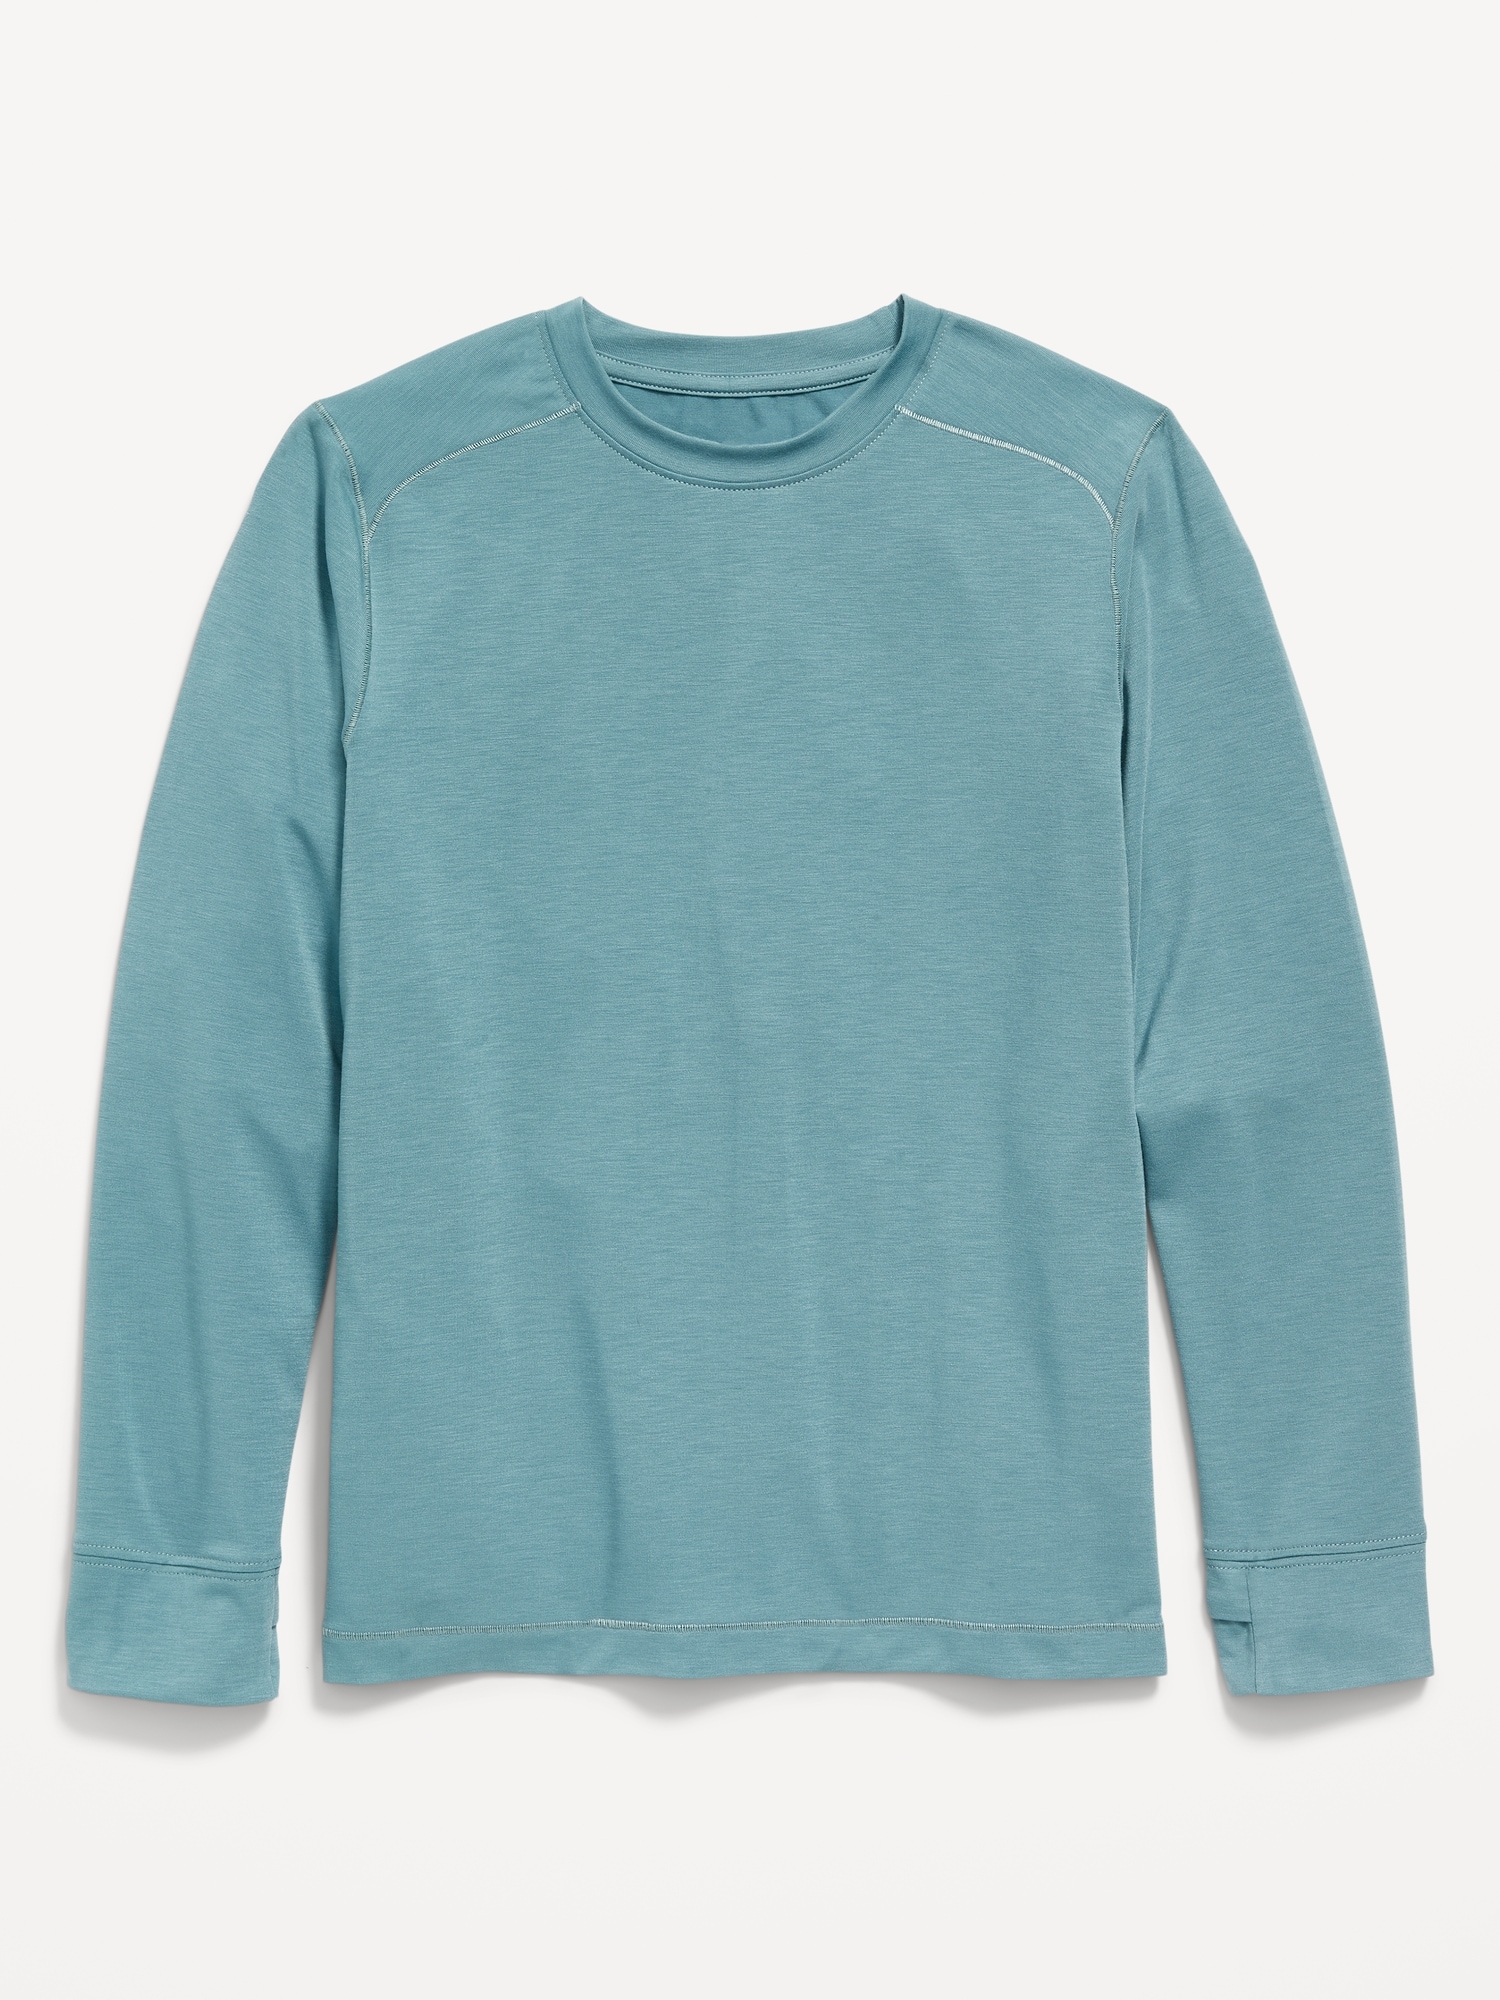 Beyond 4-Way Stretch Long-Sleeve T-Shirt for Boys | Old Navy